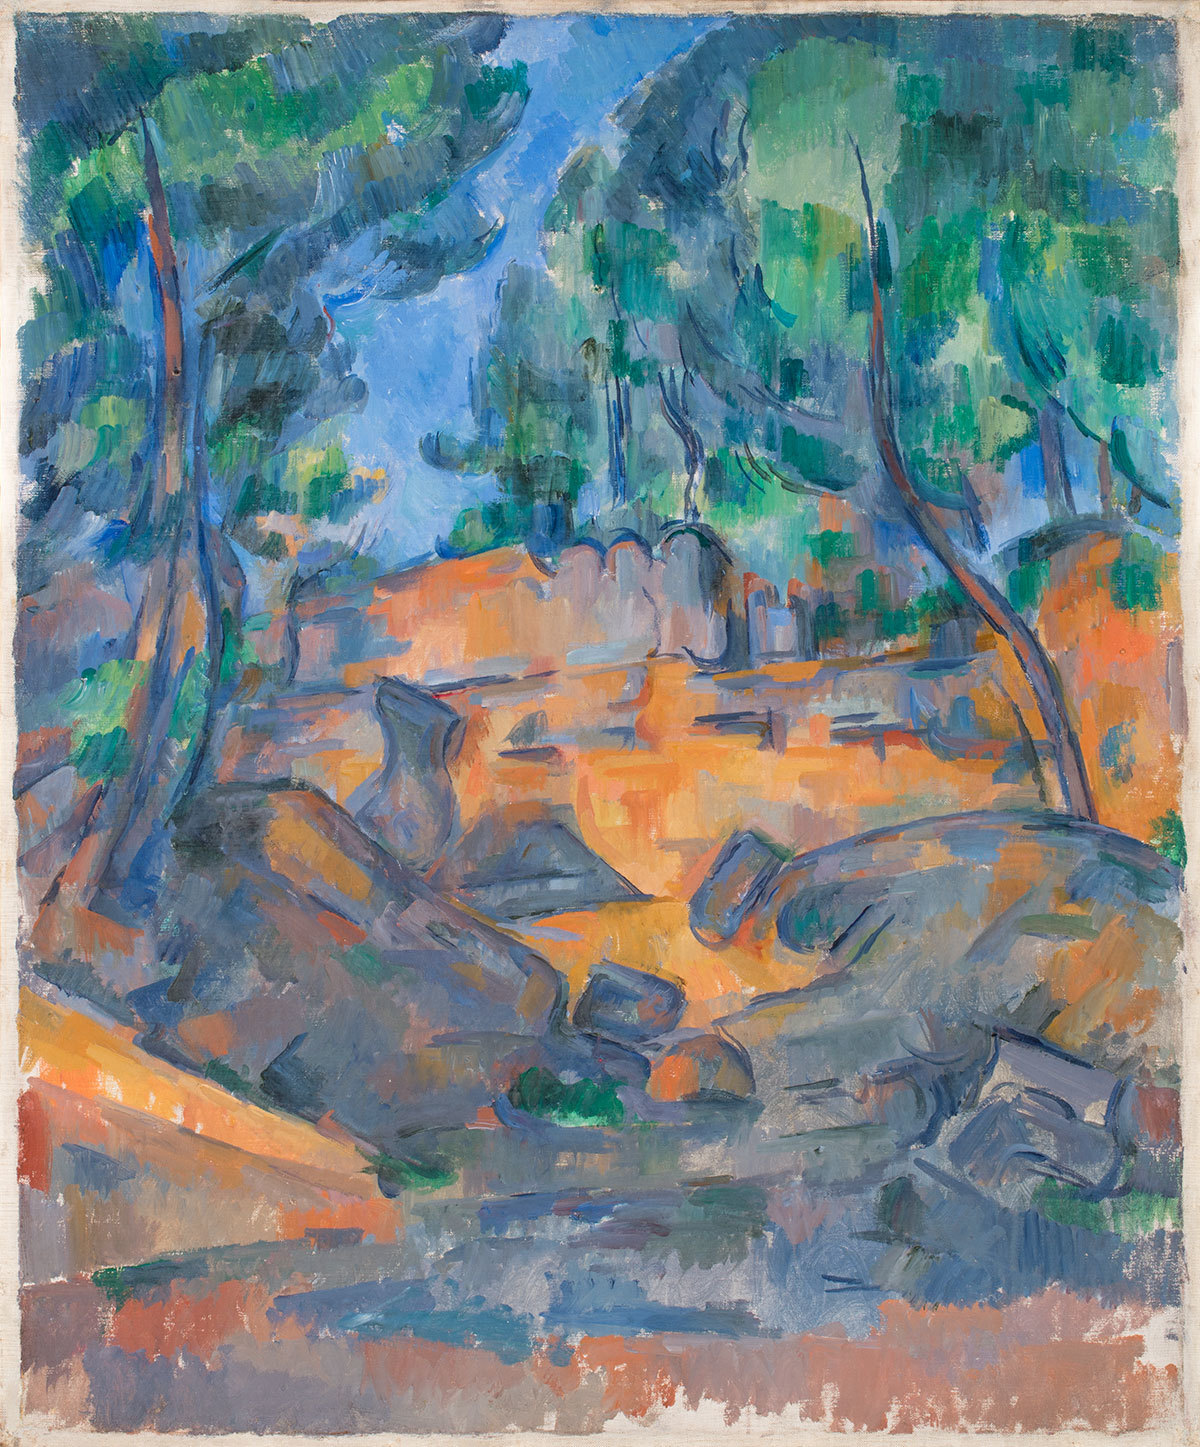 Art History News: Cézanne: The Rock and Quarry Paintings